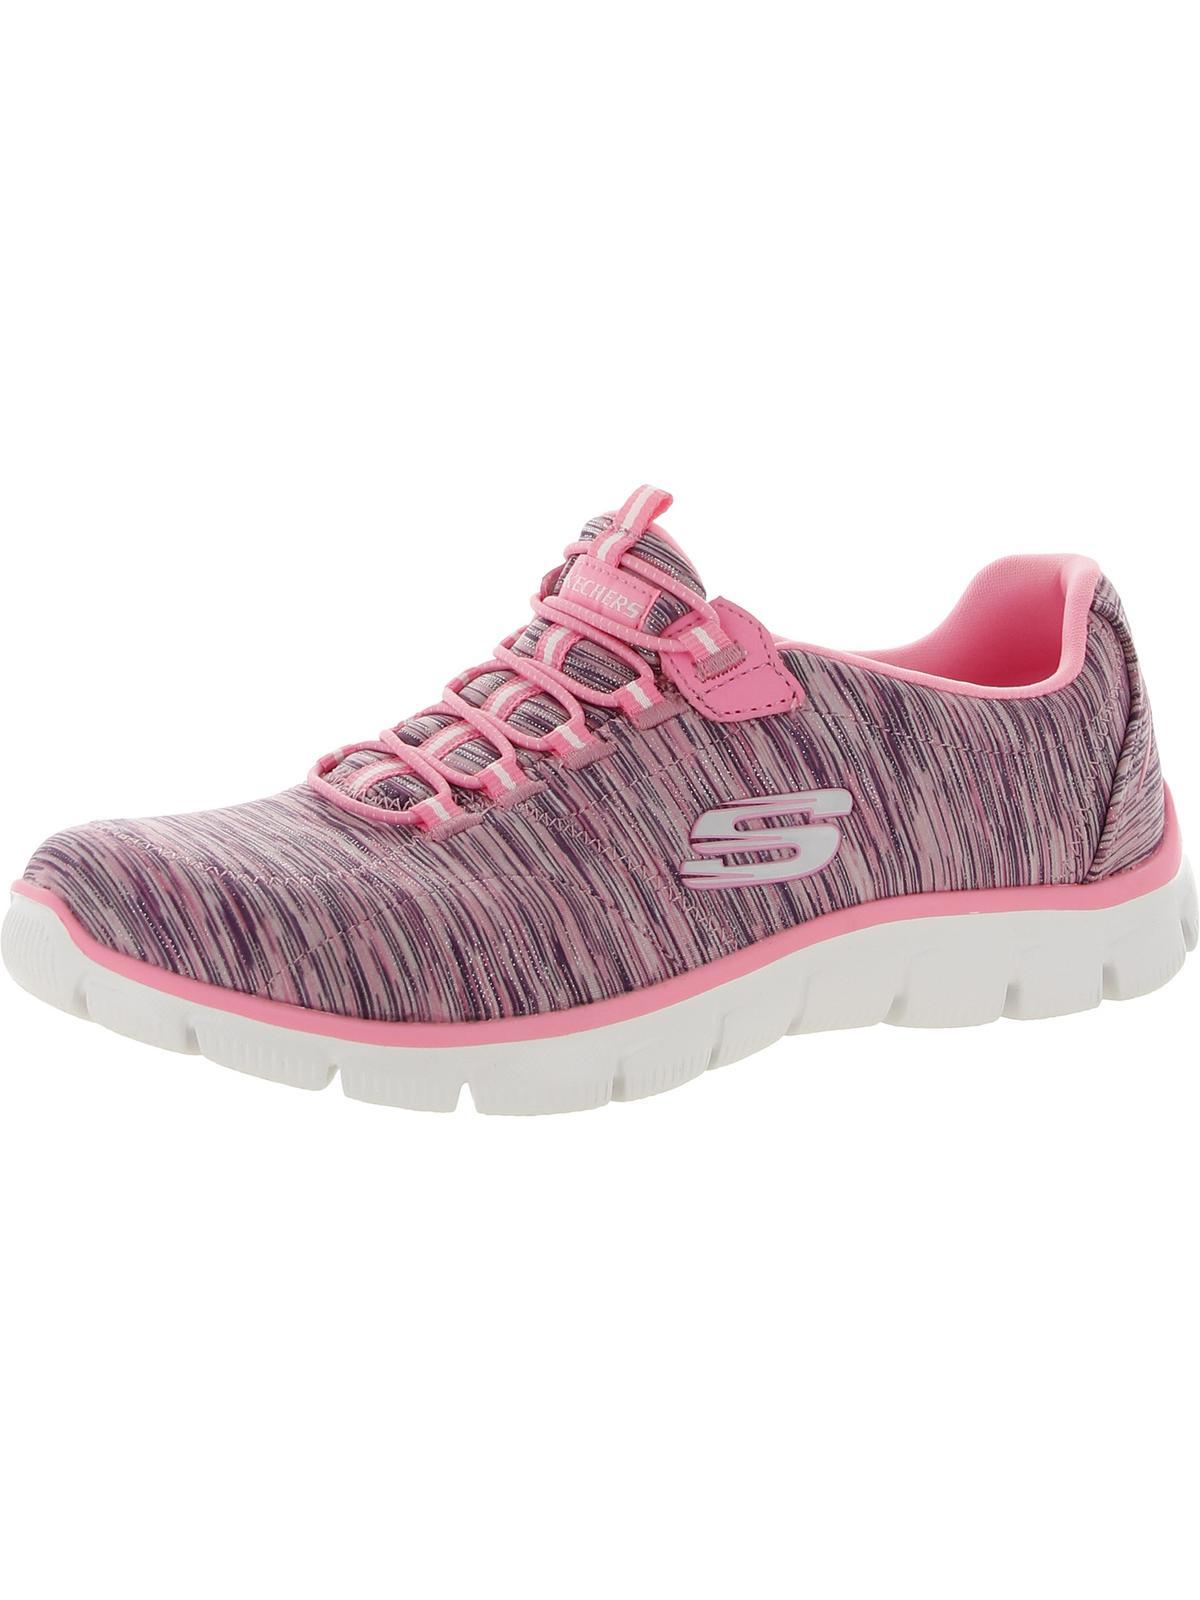 Skechers Empire-game On Fitness Lightweight Fashion Sneakers in Pink | Lyst